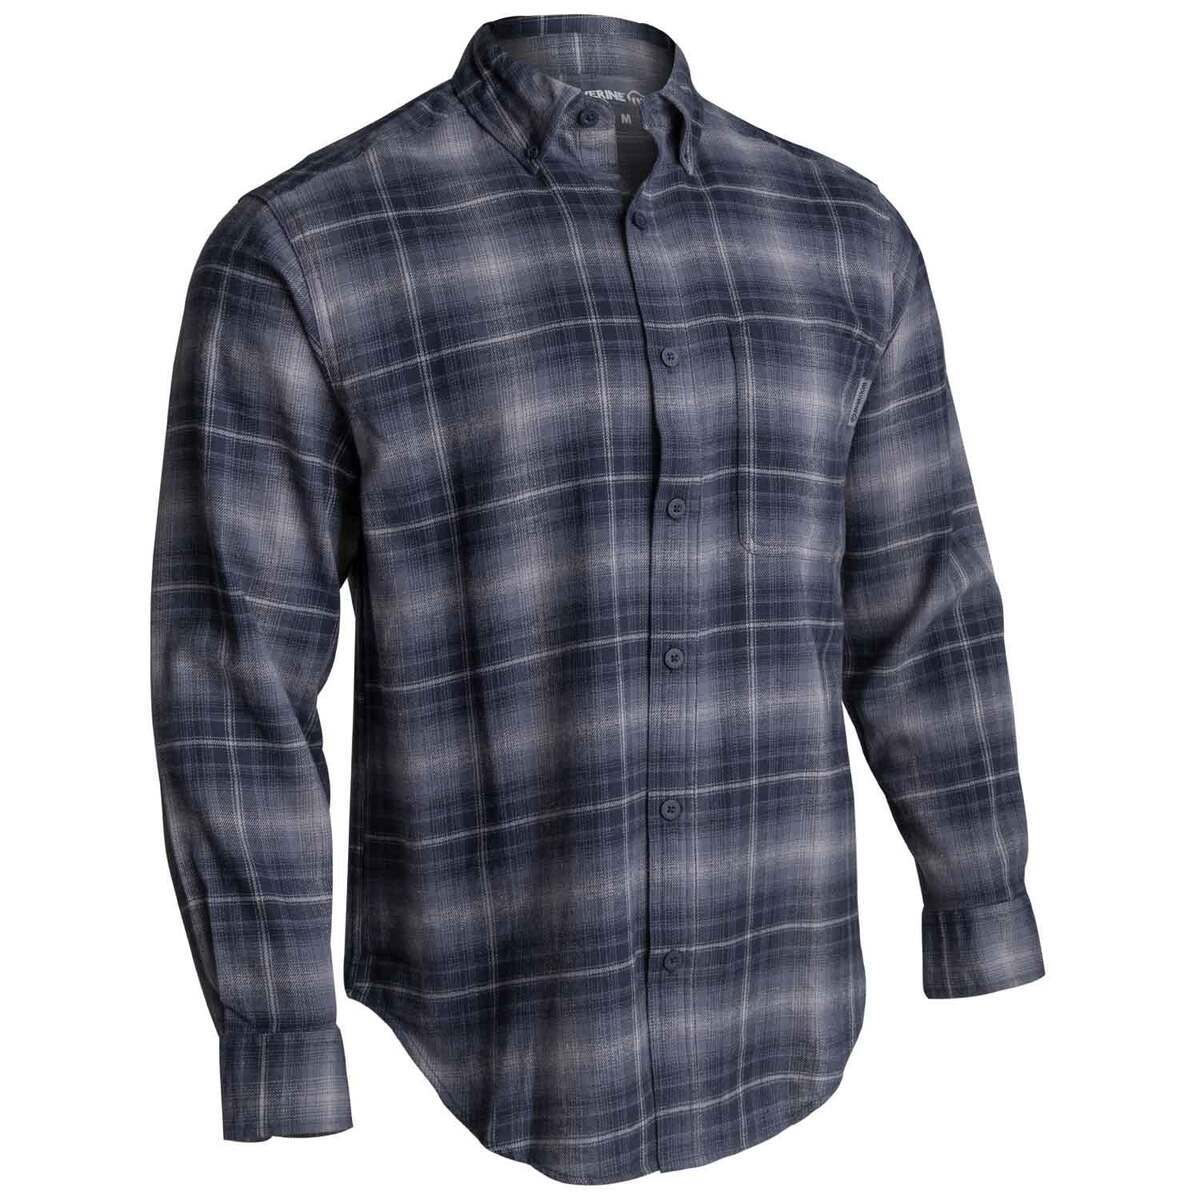 Men's Flannel Shirt  Independent Trading Company